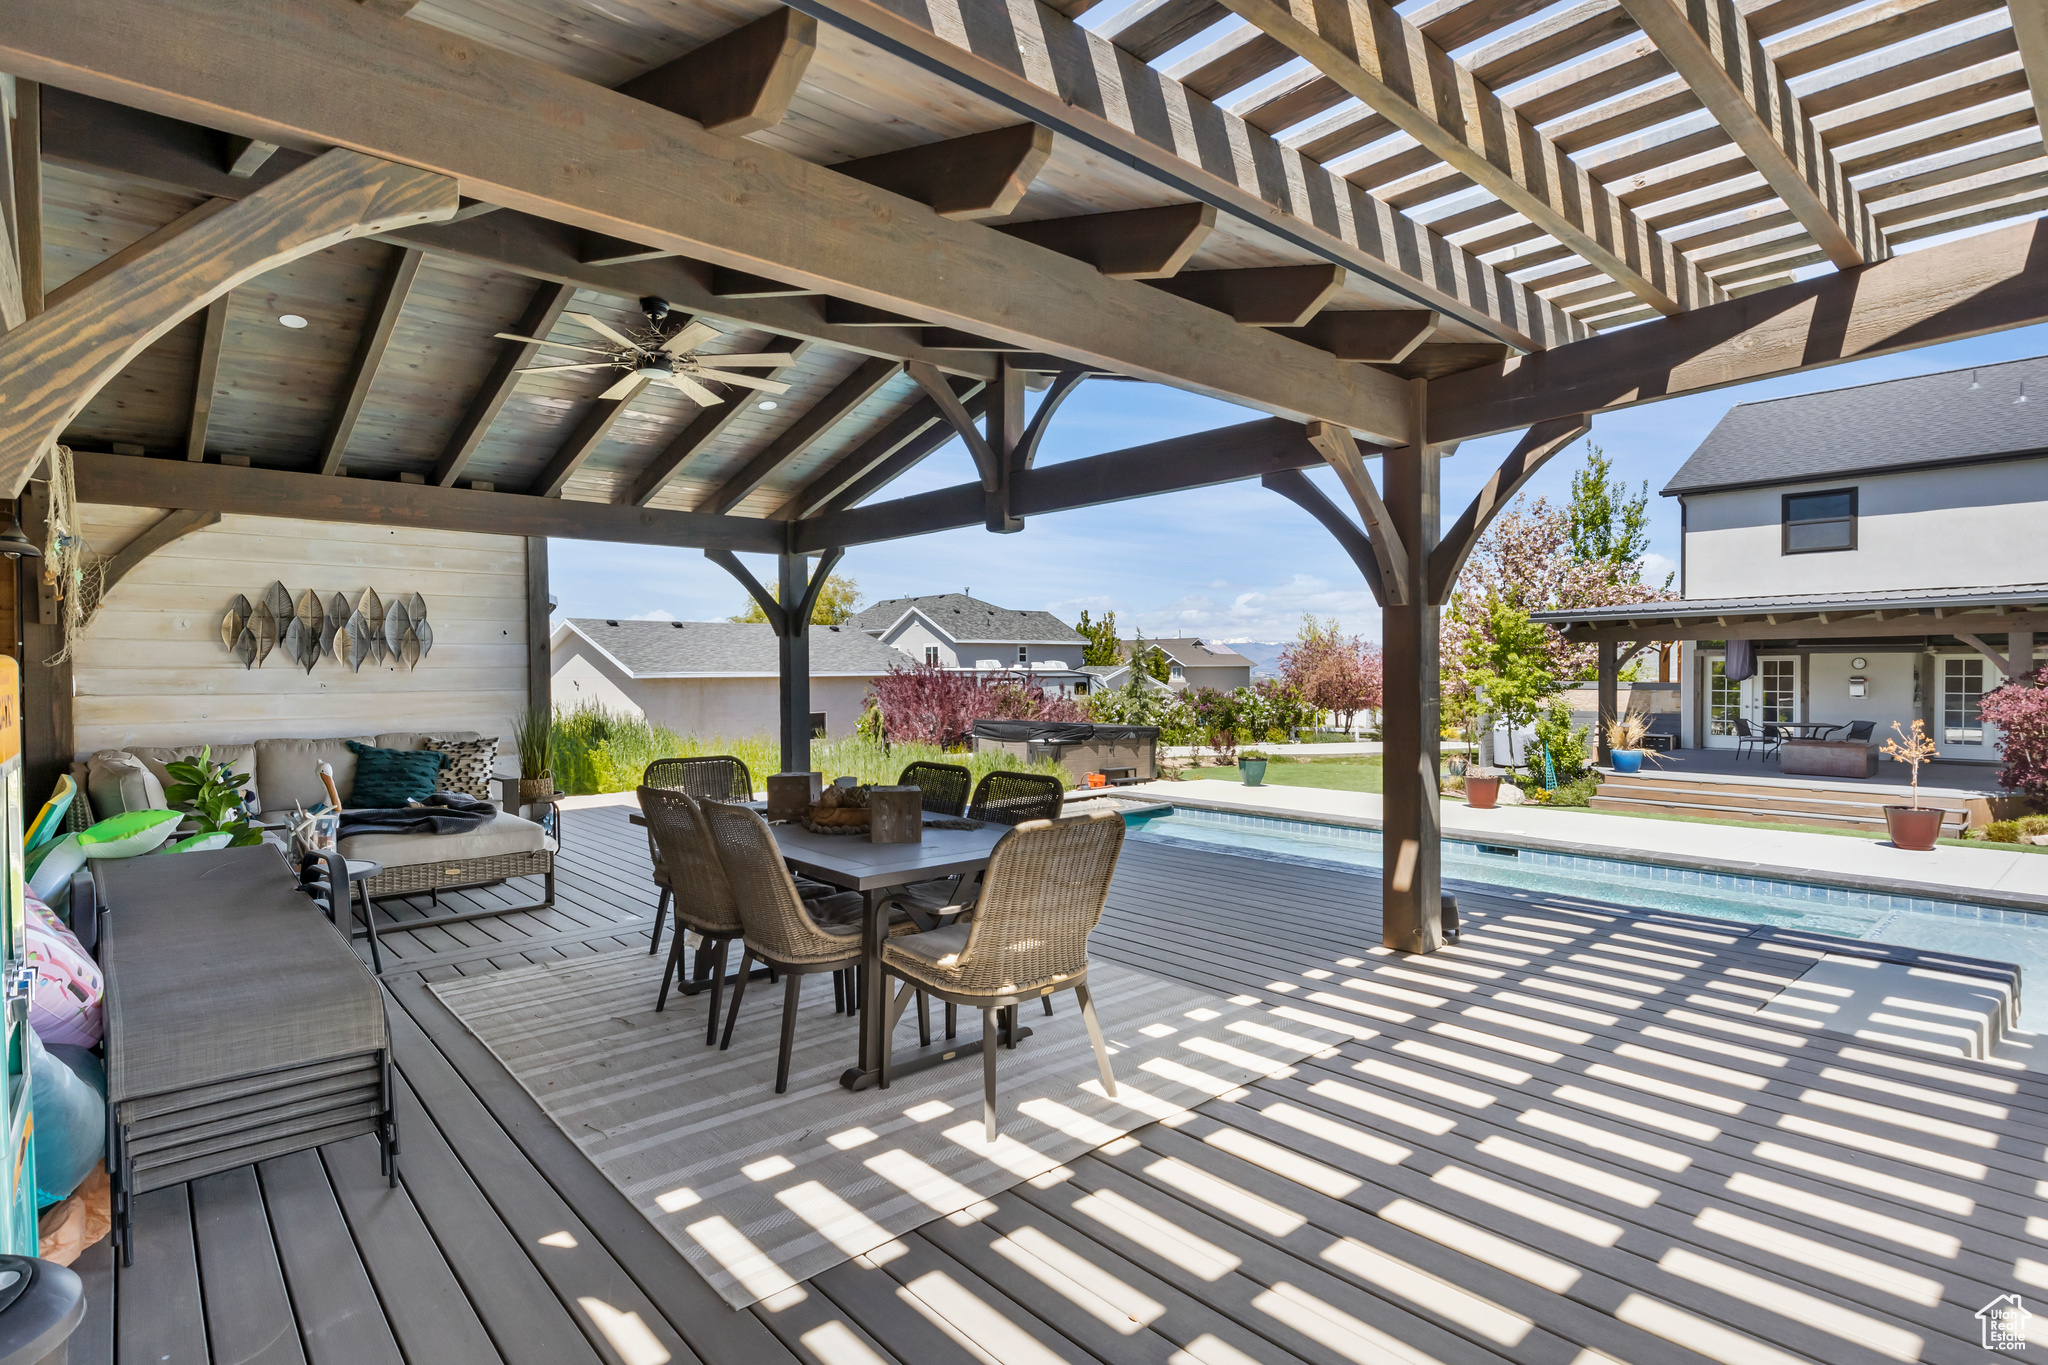 Exterior space featuring a fenced in pool, ceiling fan, and a pergola